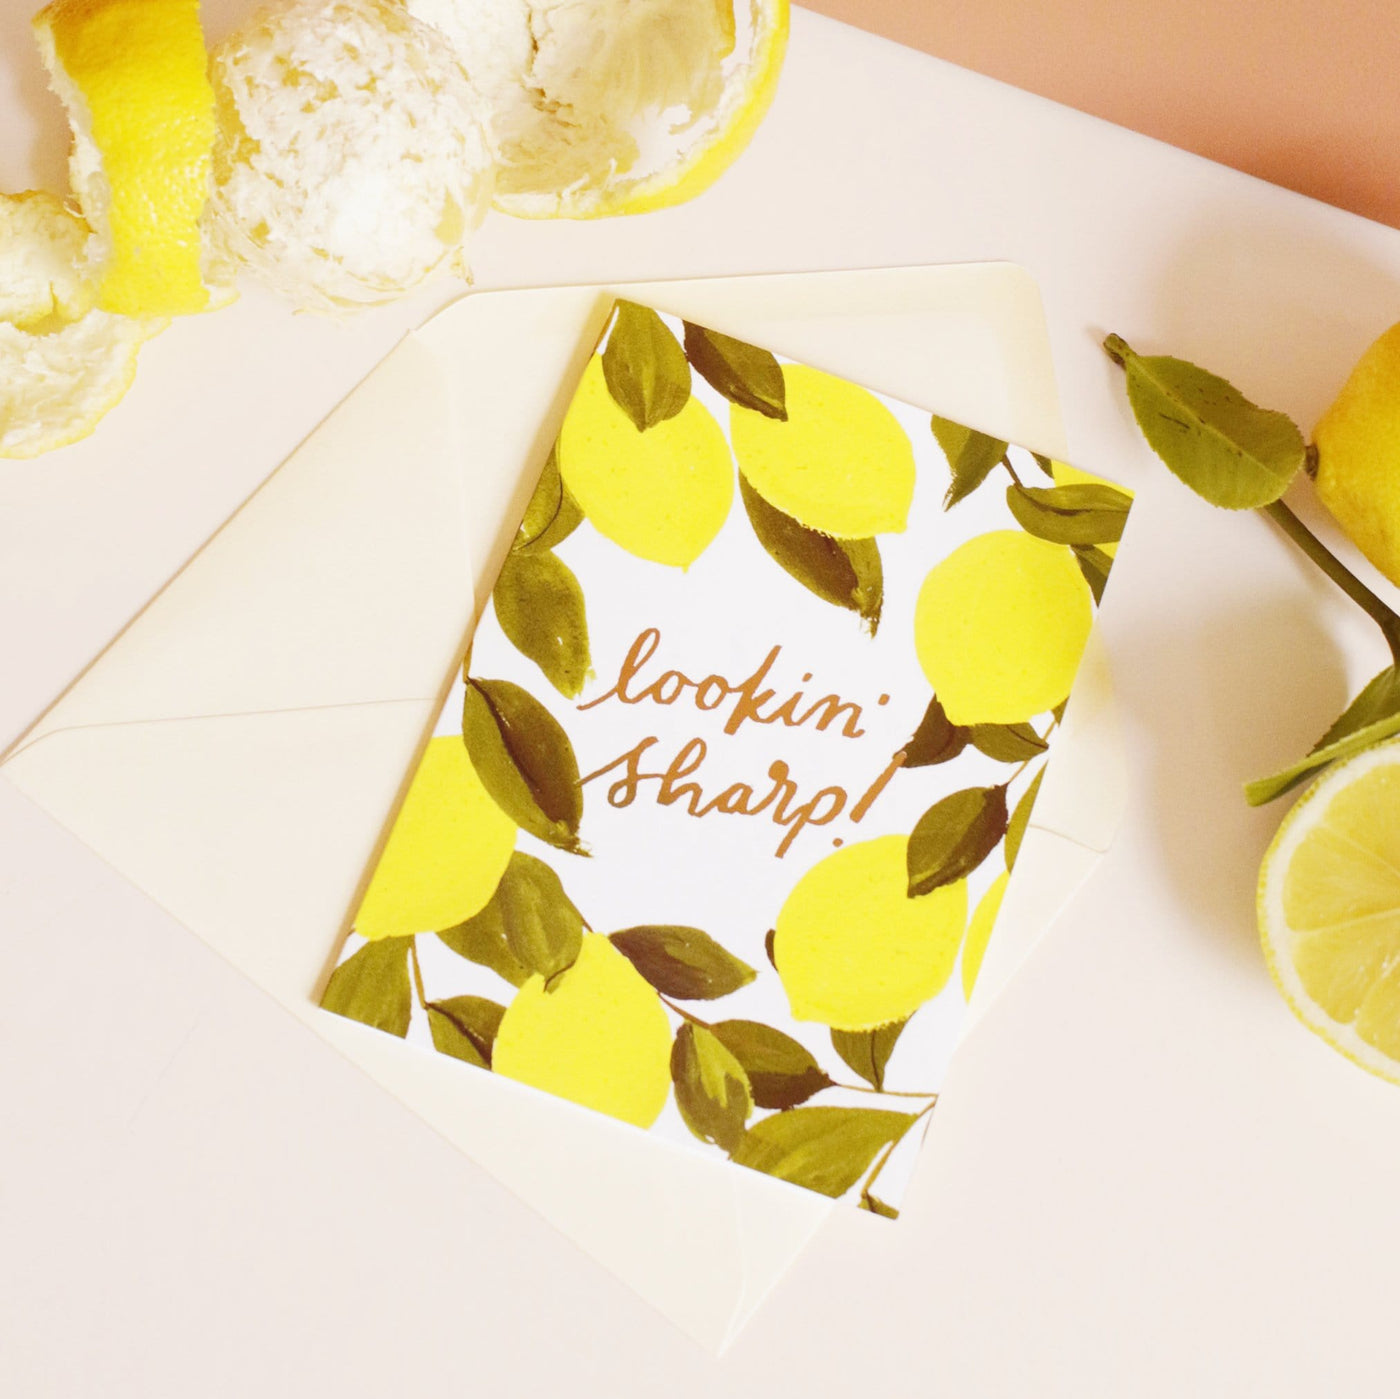 Illustrated Lemon and Green Leaf A6 Card With Looking Sharp In Gold Lettering With Pale Yellow Envelope With Real Lemons - Annie Dornan Smith